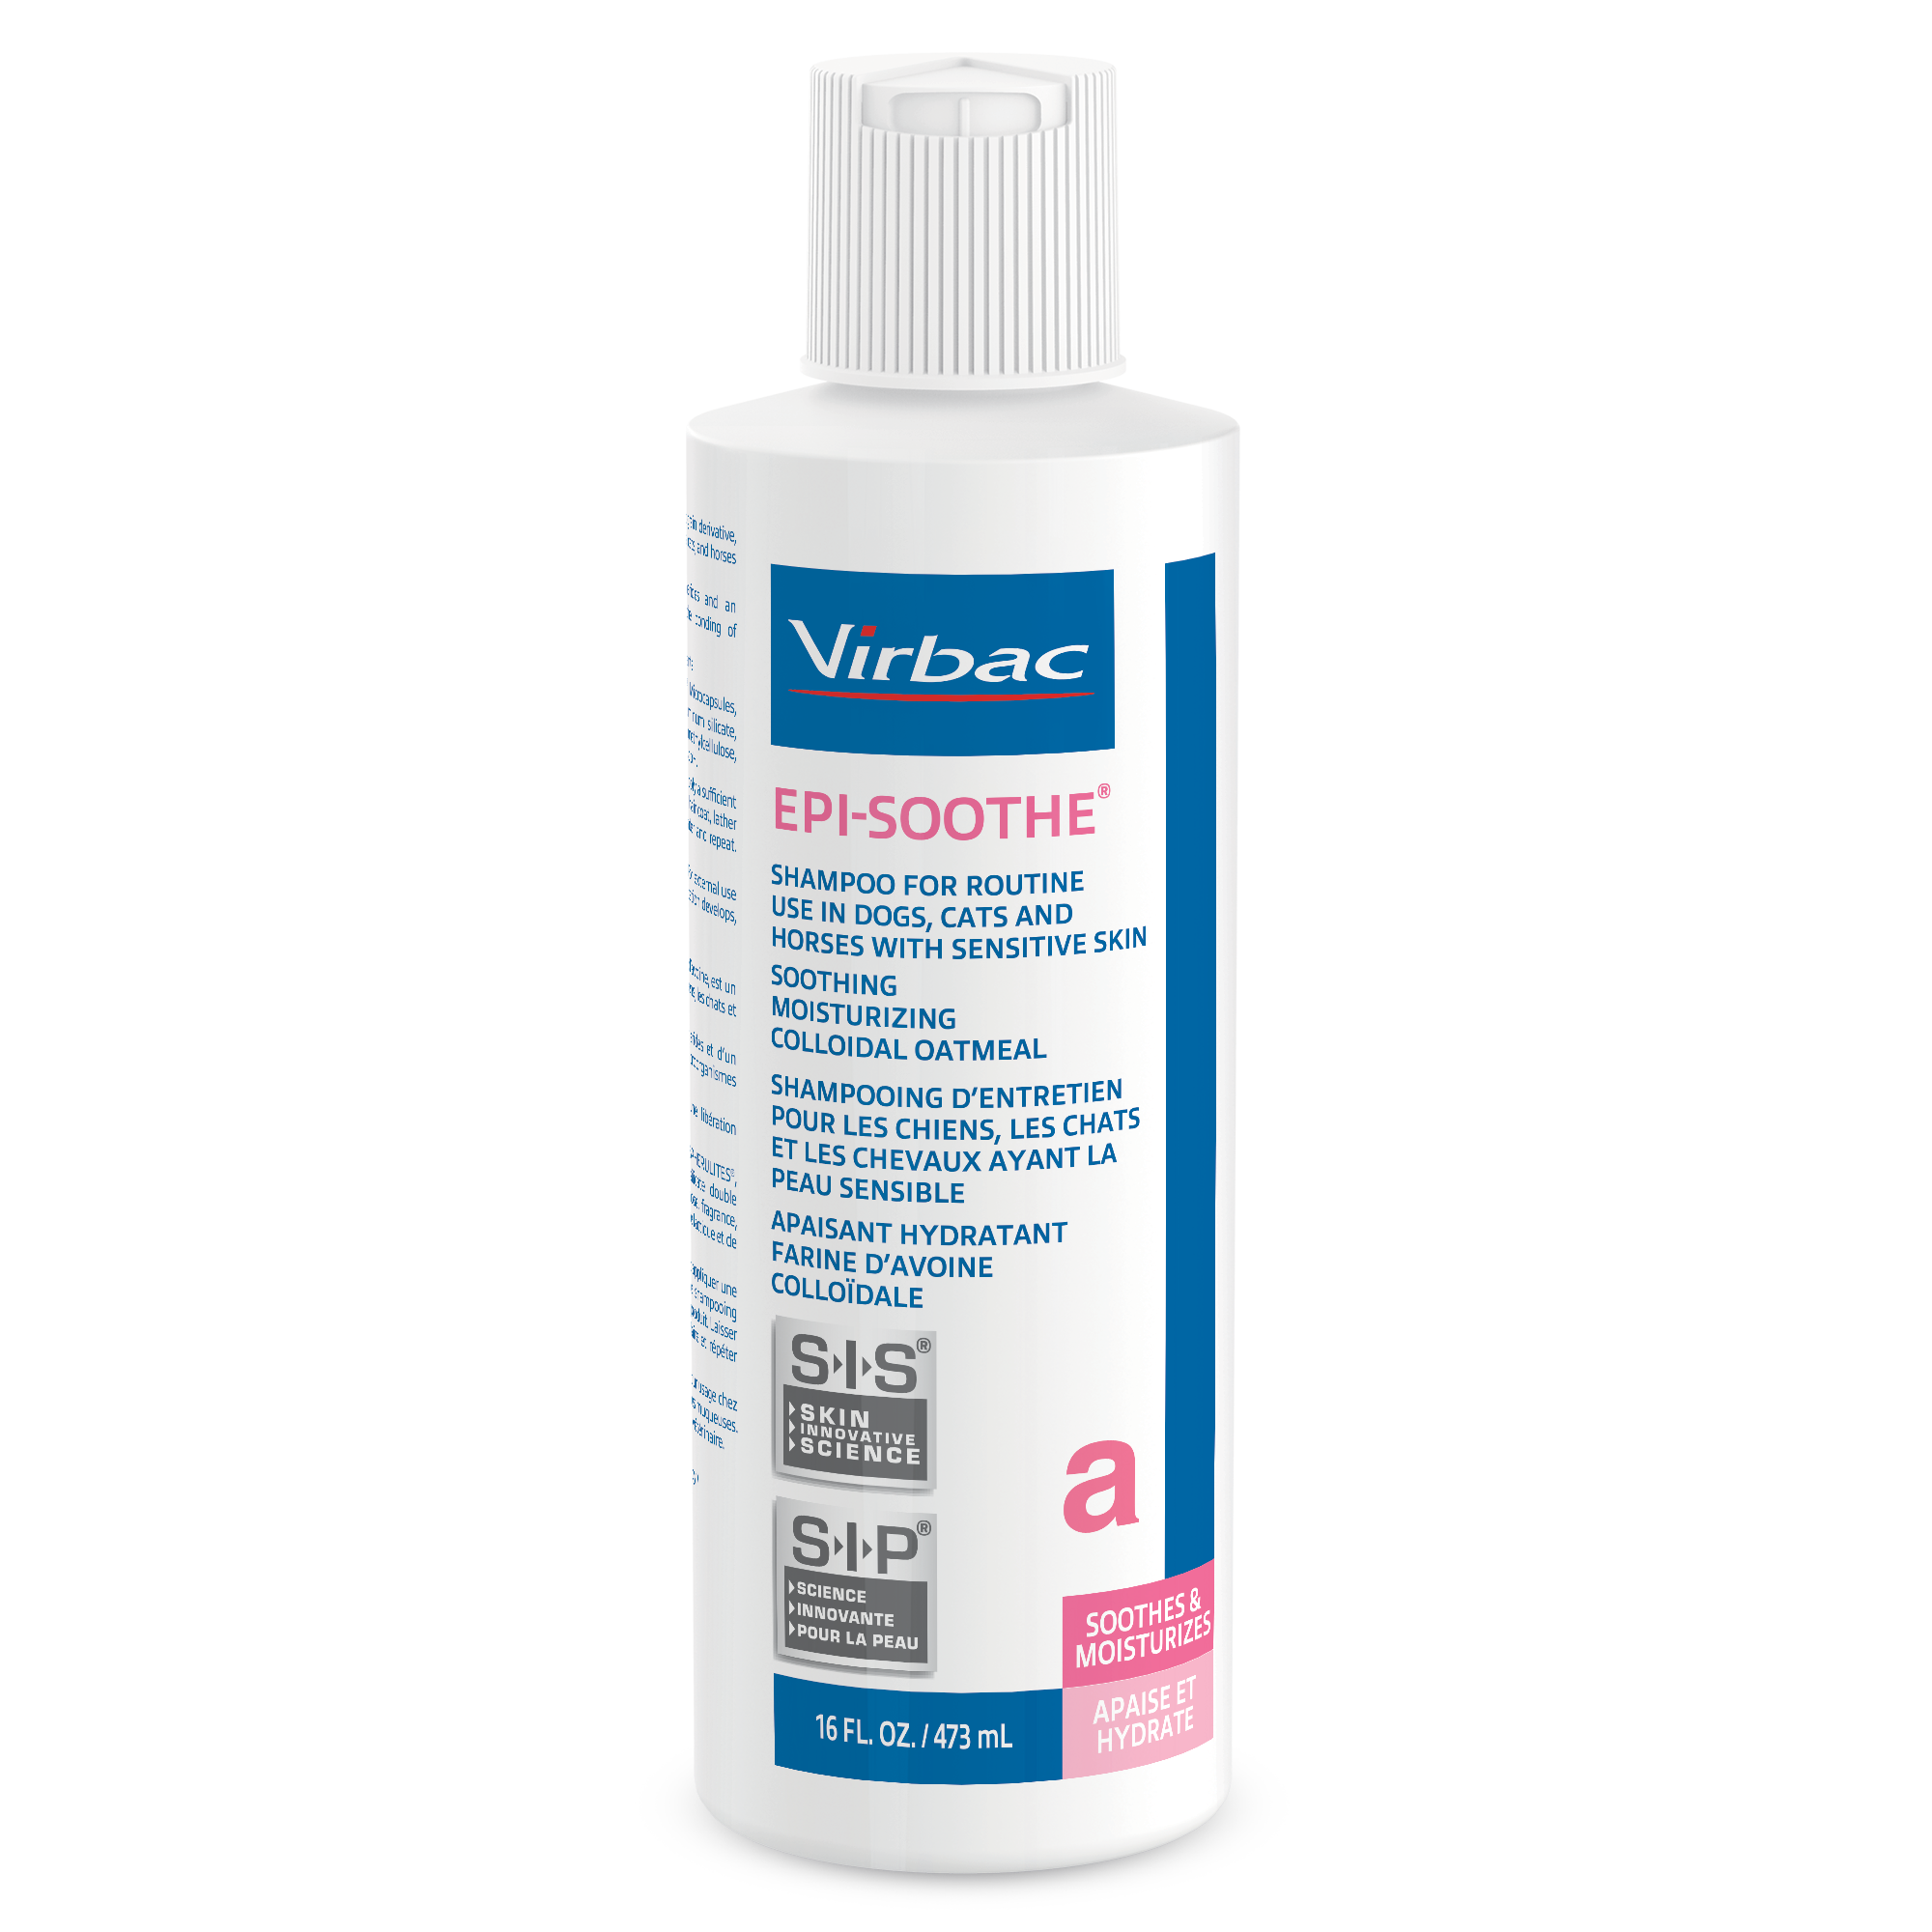 Epi-Otic Advanced Ear Cleanser for Dogs, Cats, Puppies and Kittens Virbac -  Ear Care, Health